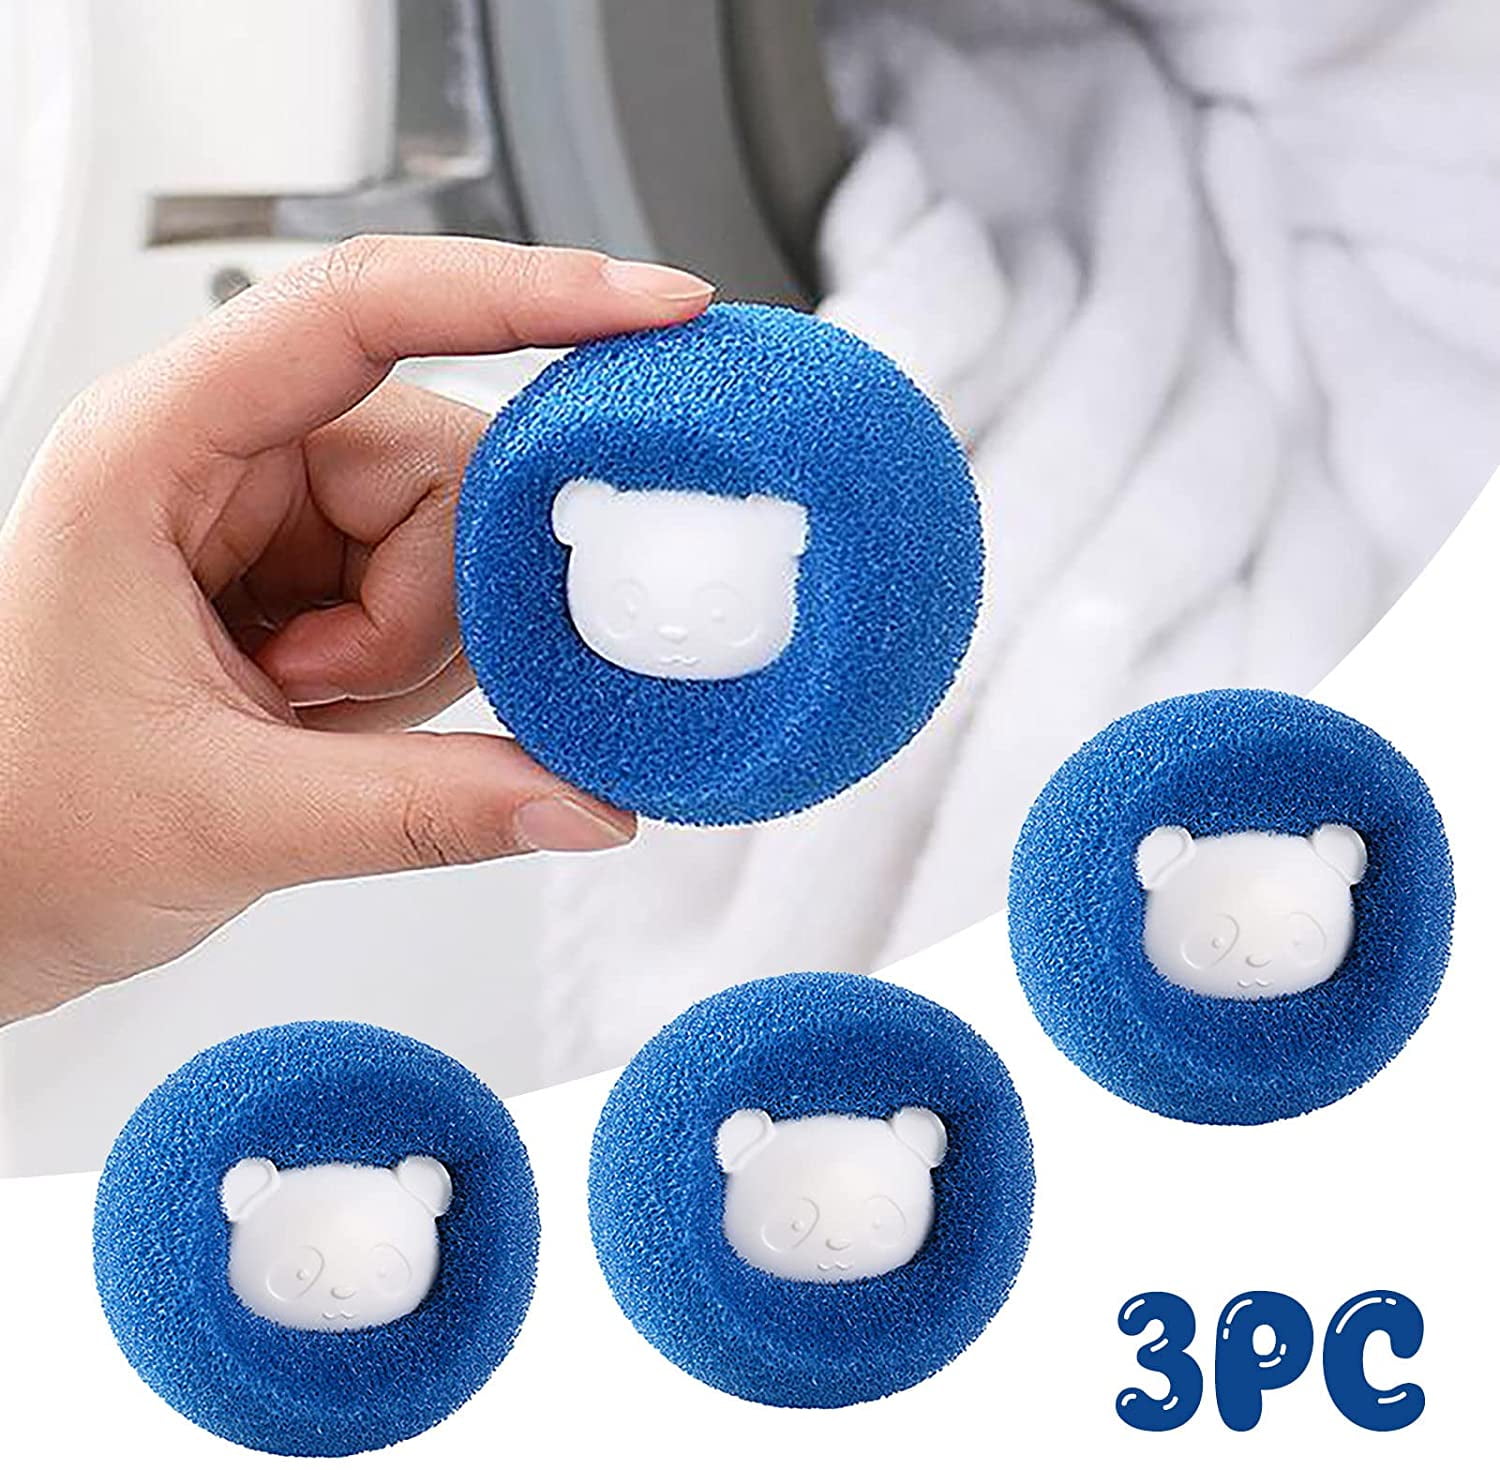 Balls Laundry Dryer Fabric Softening Ball Launder And Iron In One Time For Wash 